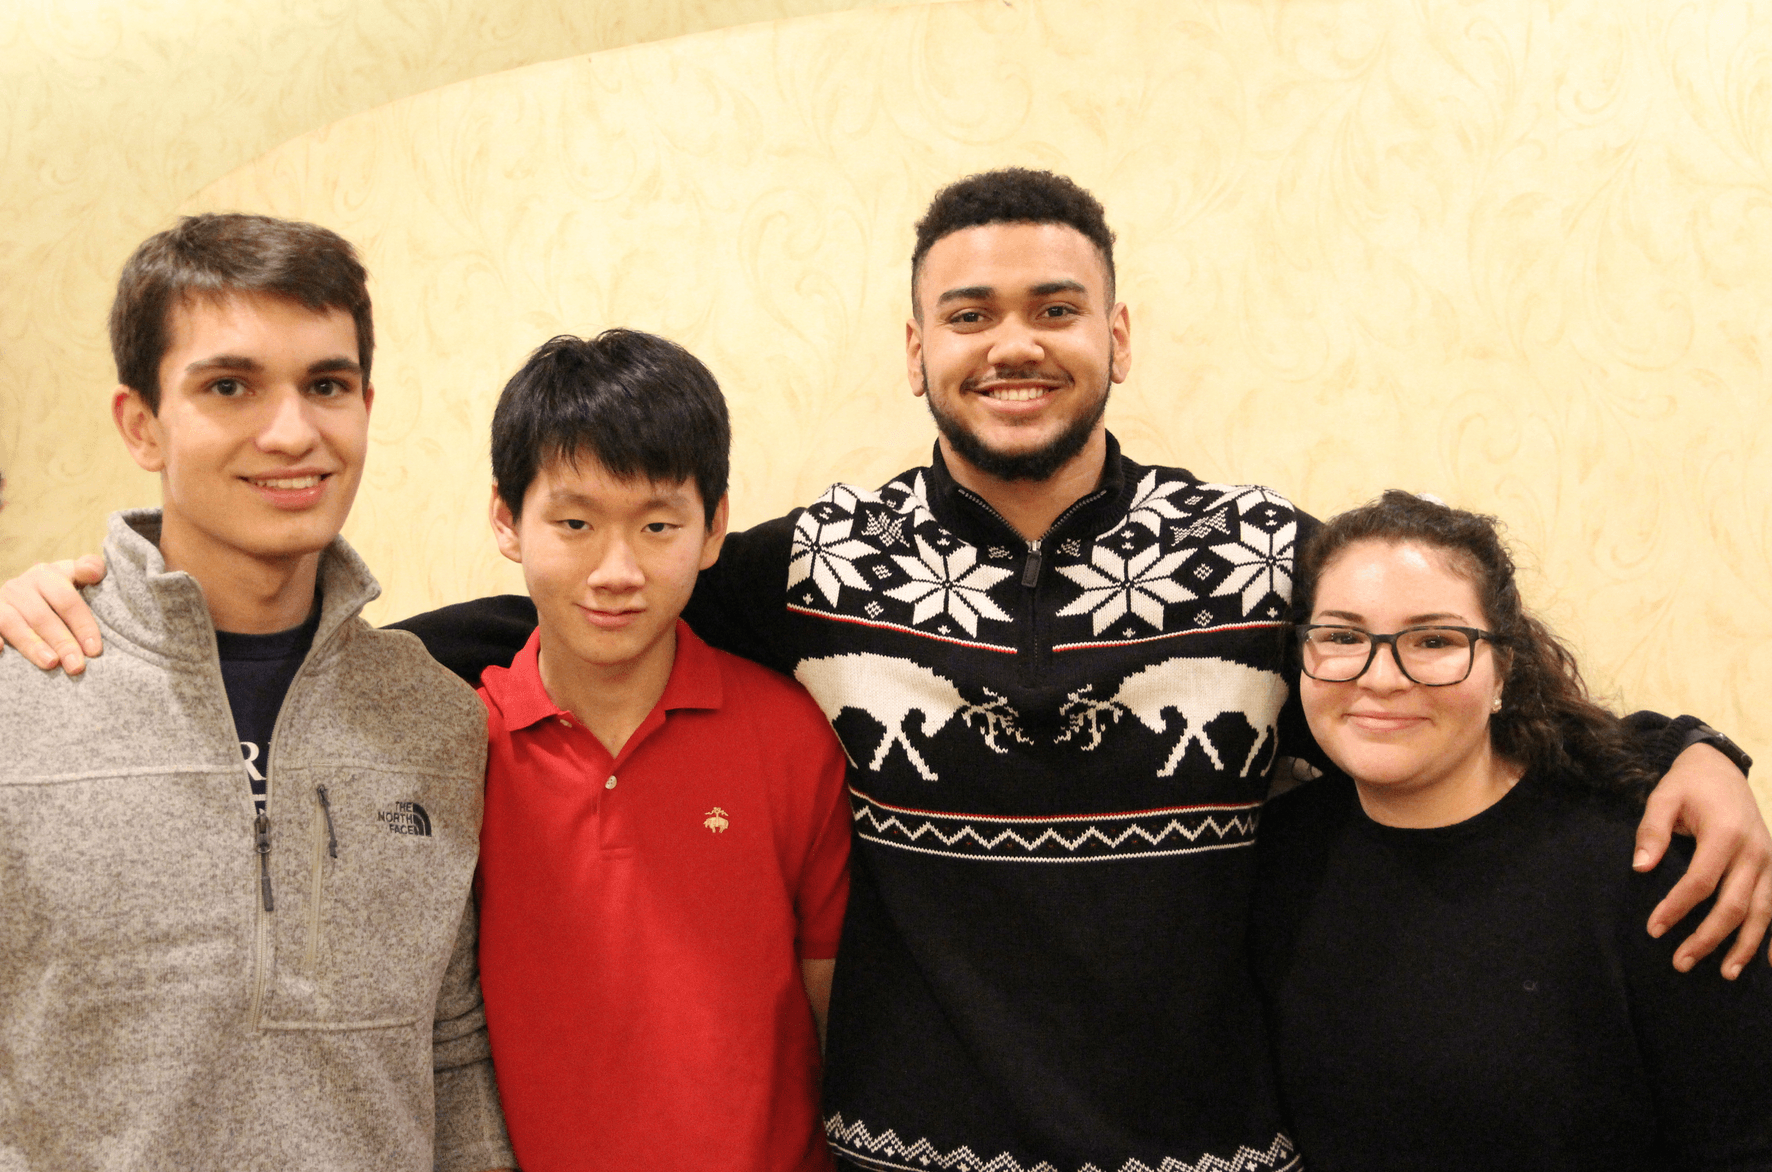 Alex Khan, Woojin Kwak, Sean Deyton, and Katie Pickett all volunteered for the first time at the Knights of Columbus Christmas dinner for seniors. Dec 25, 2017 Photo: Leslie Yager